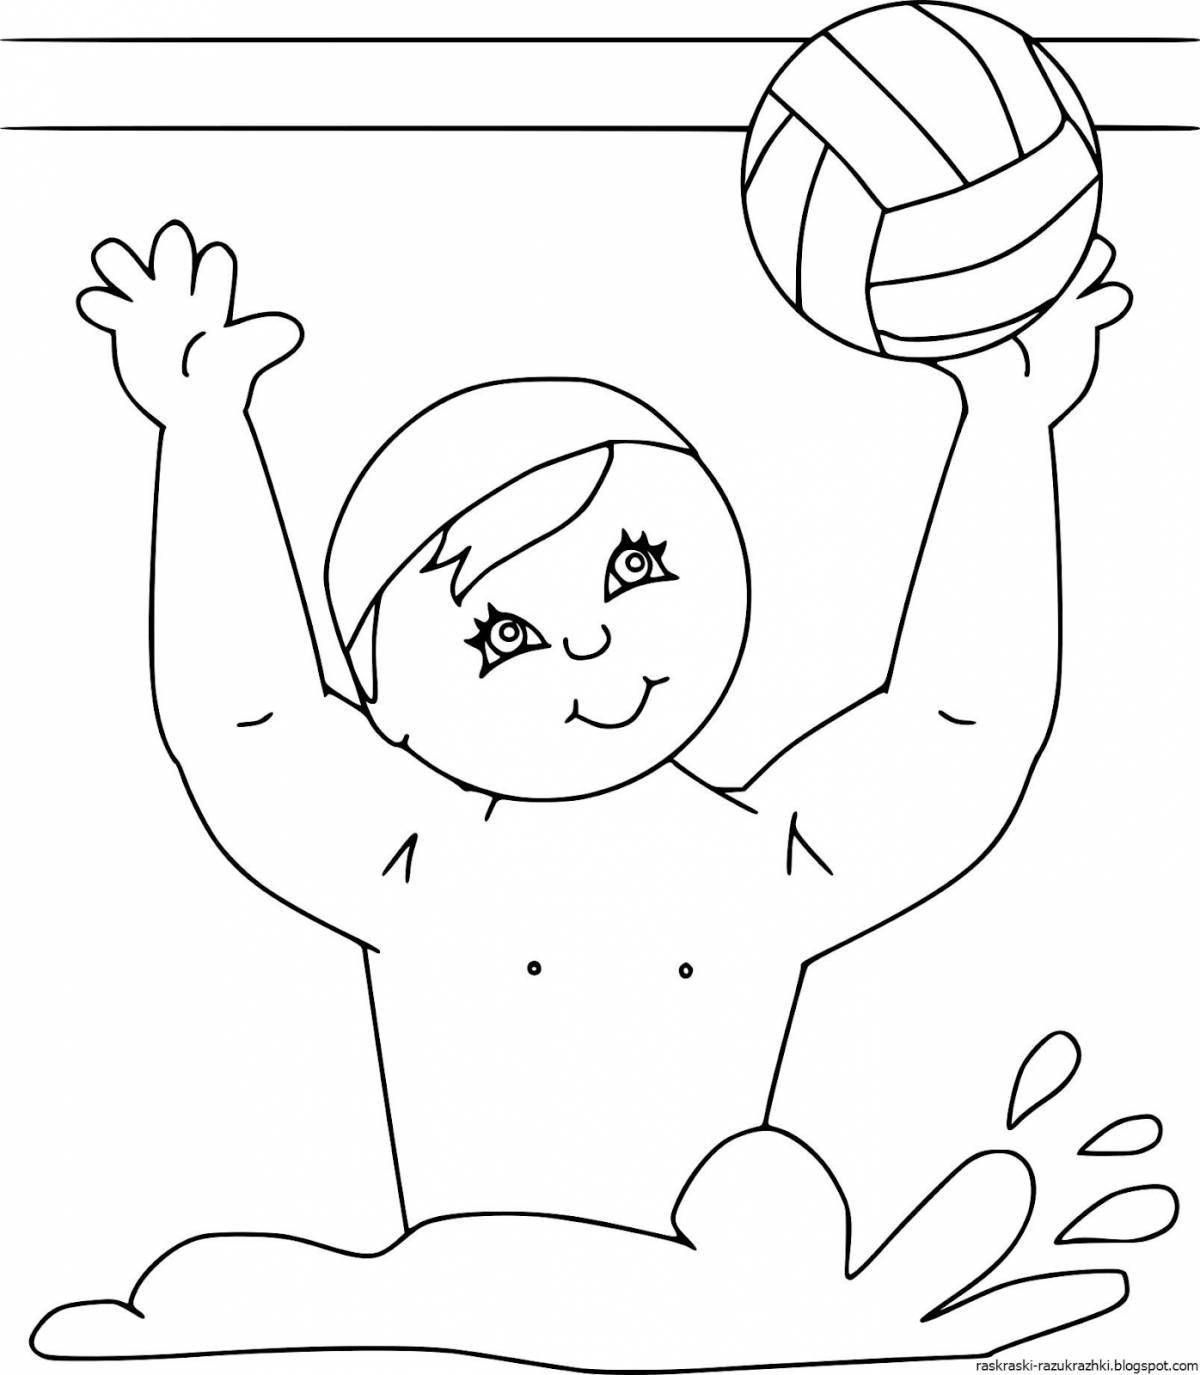 Great coloring book health and sports